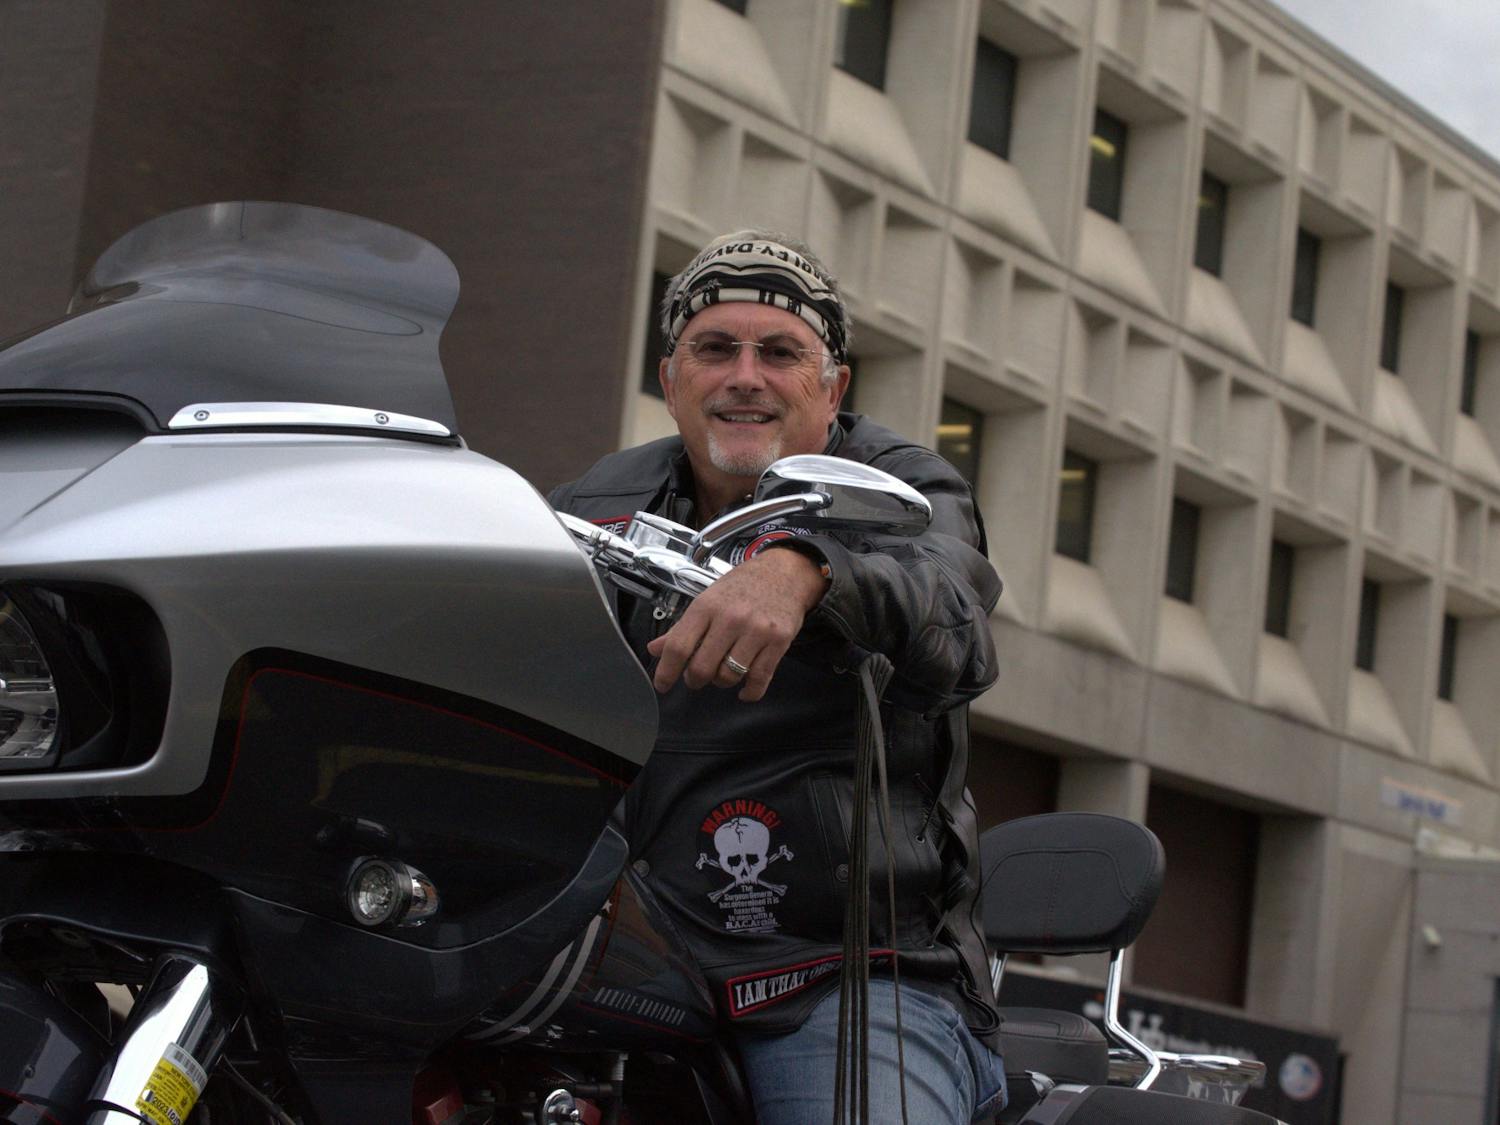 As a member of Bikers Against Child Abuse, Caribe provides comfort, safety and support for abused children. 